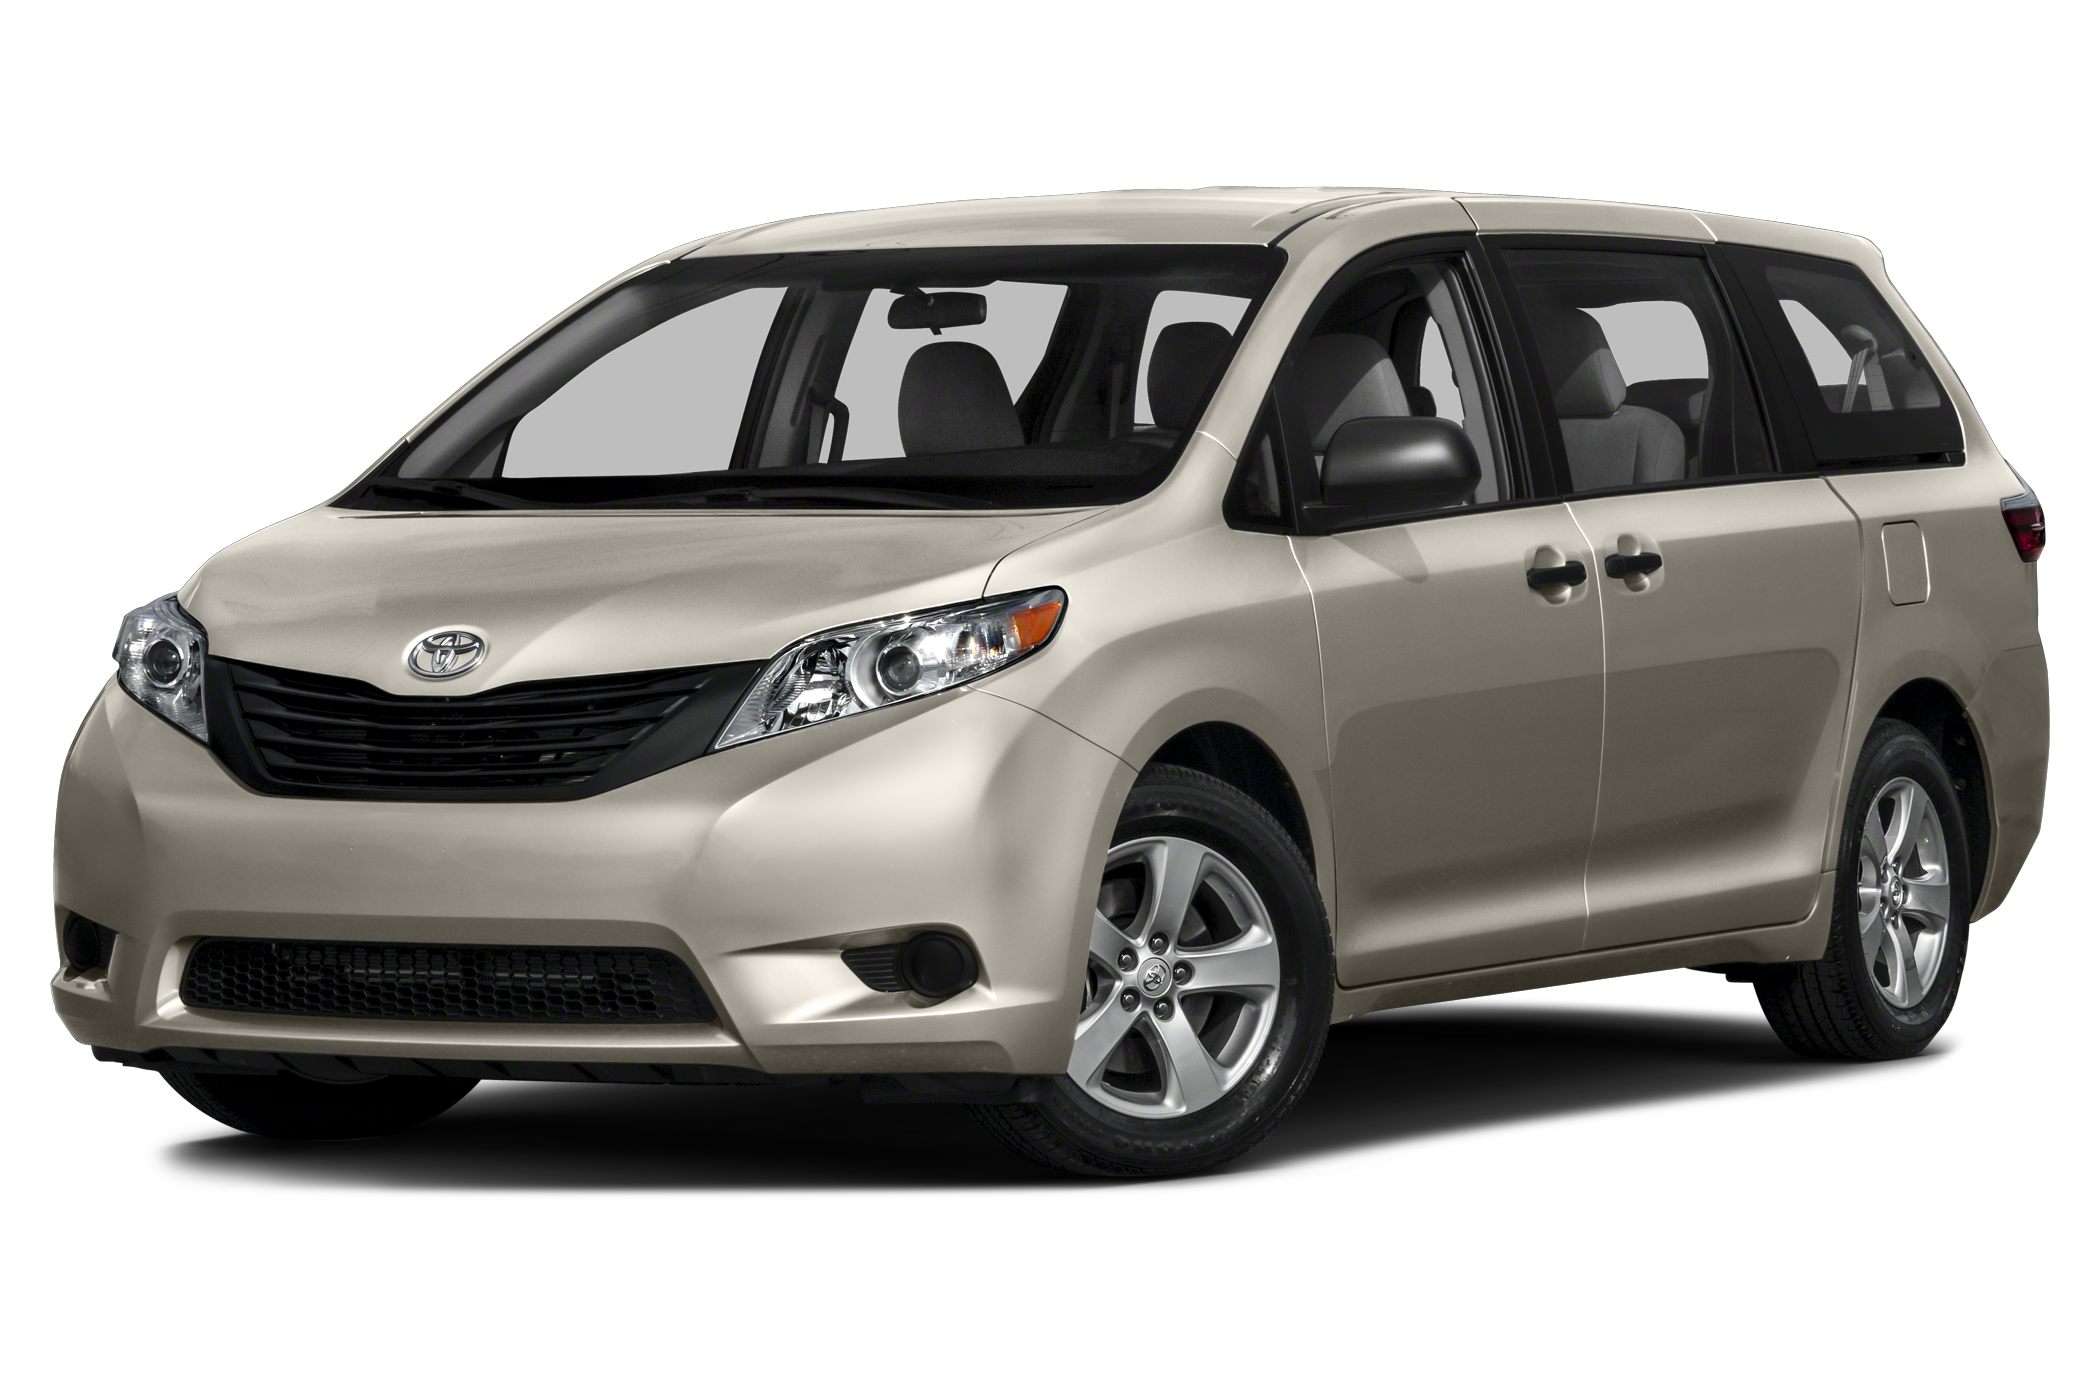 2017 Toyota Sienna Specs and Prices